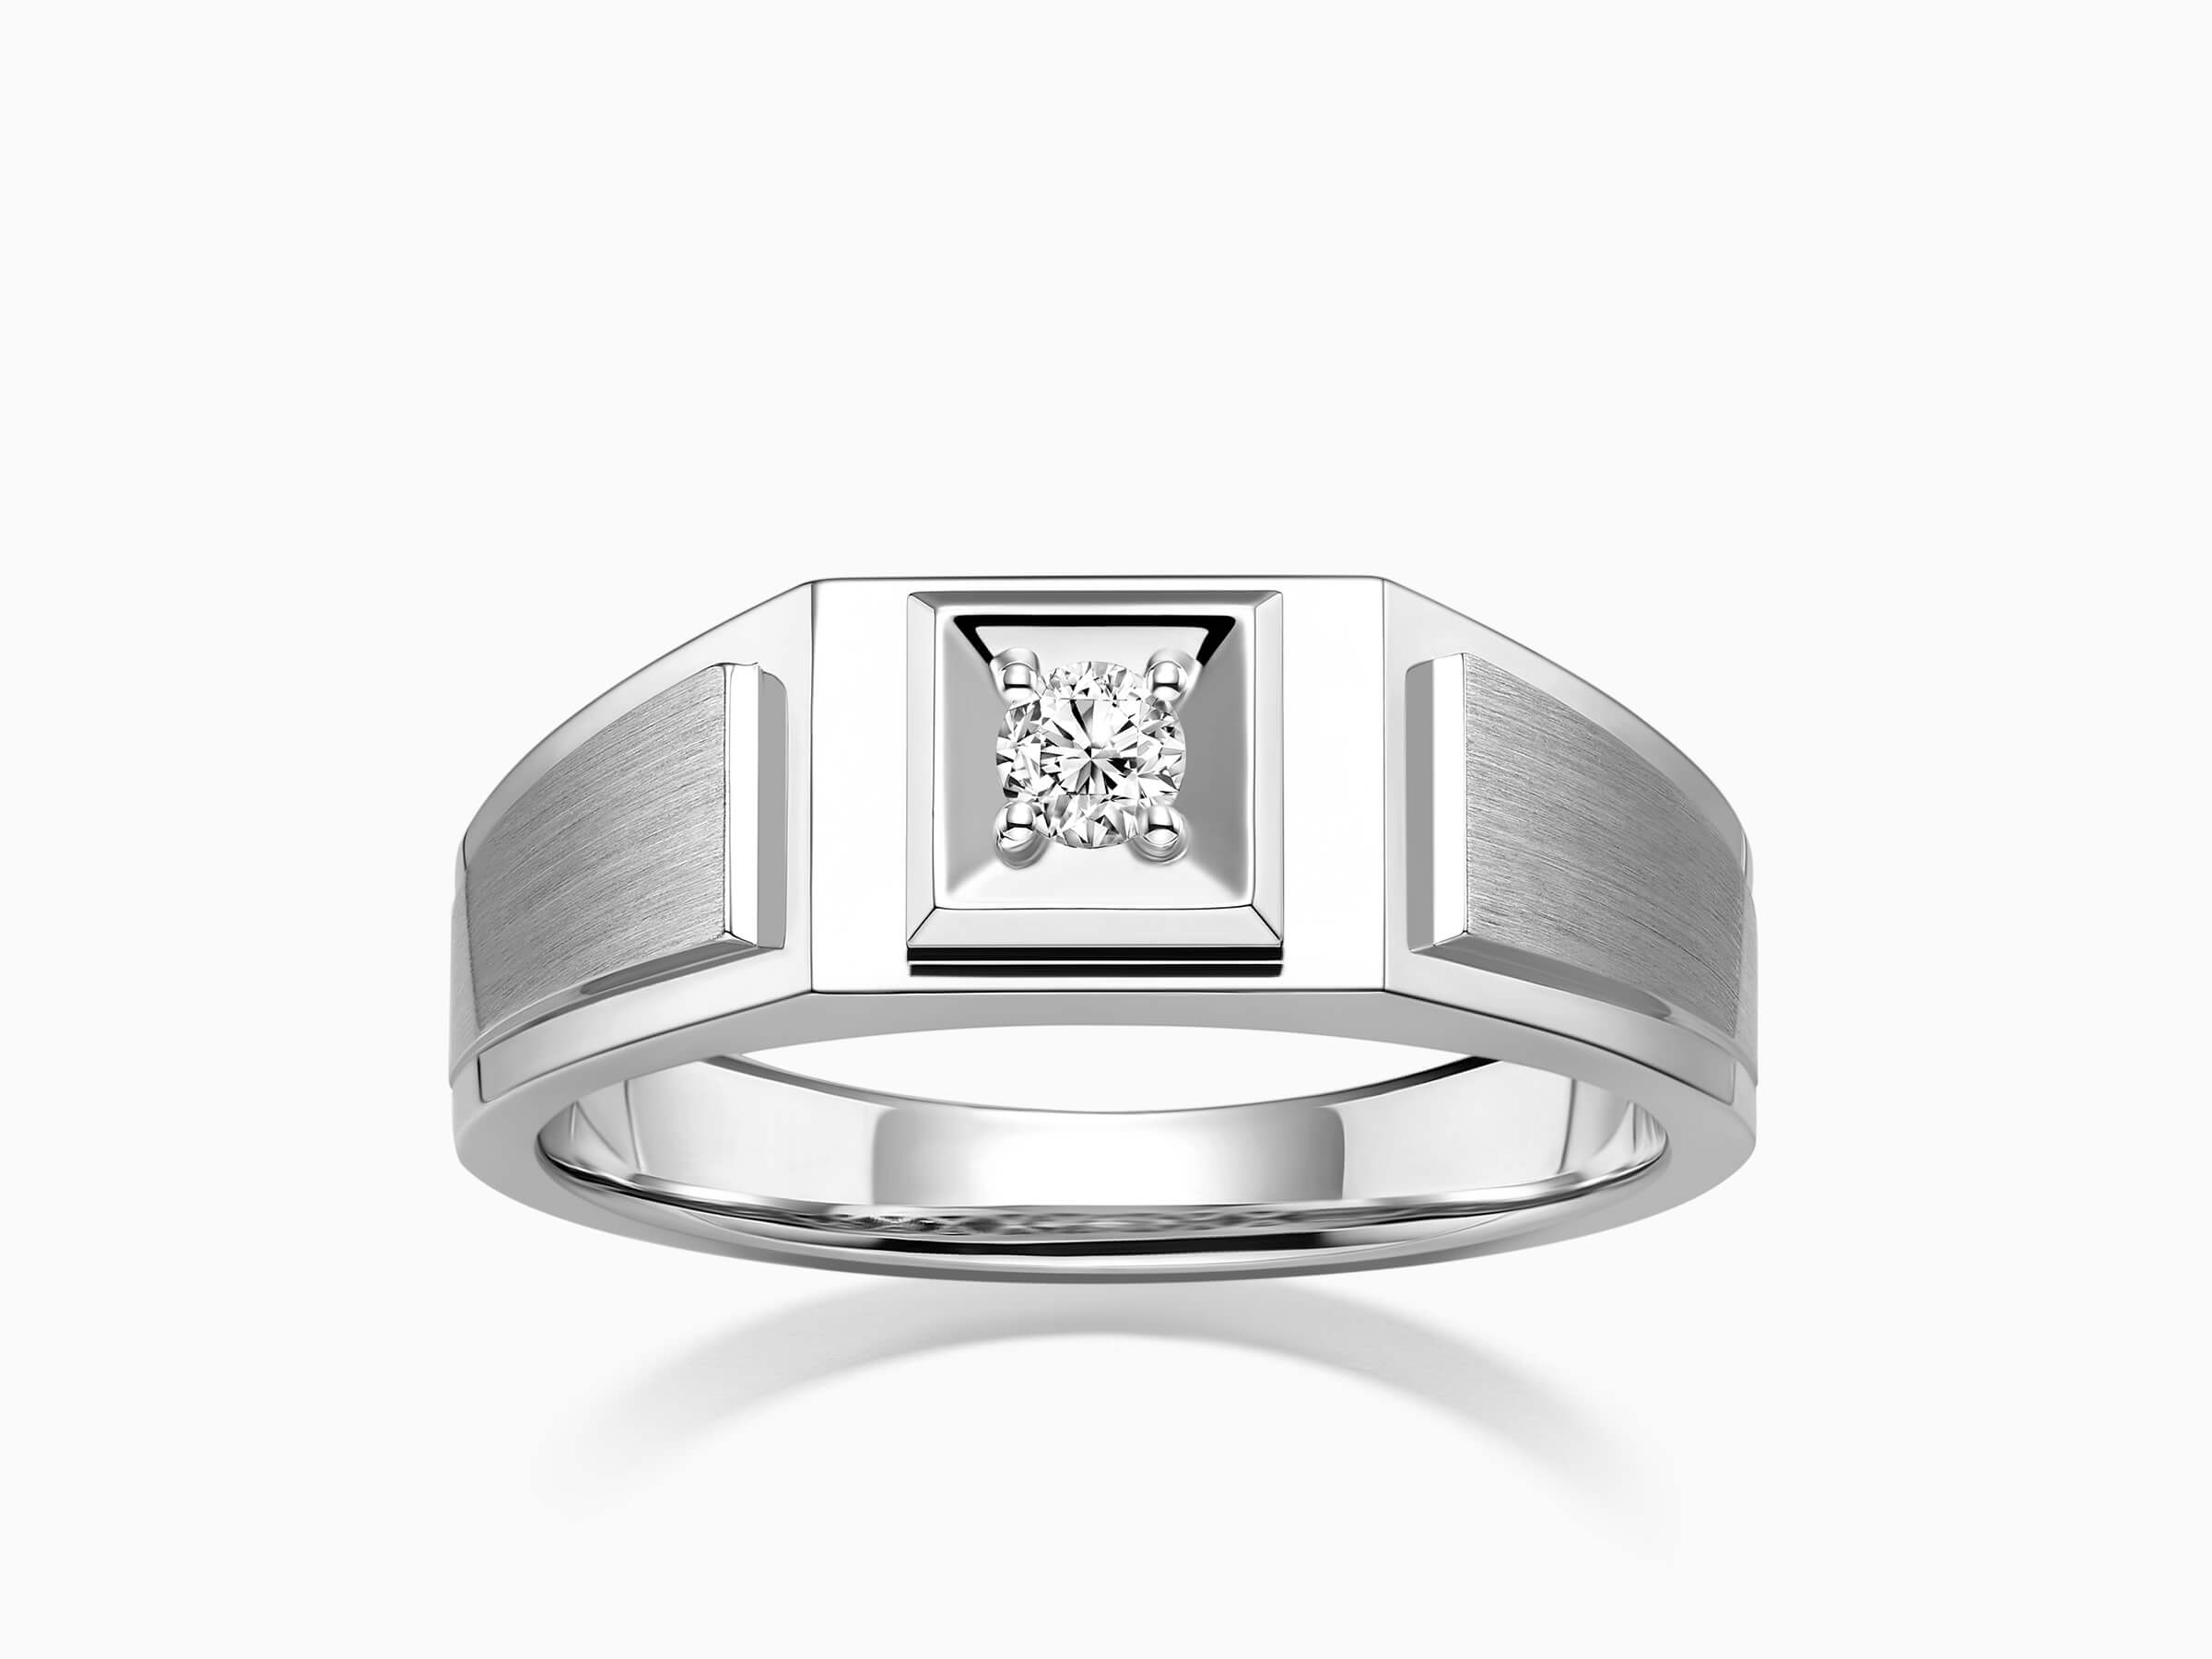 Darry Ring wide band wedding ring